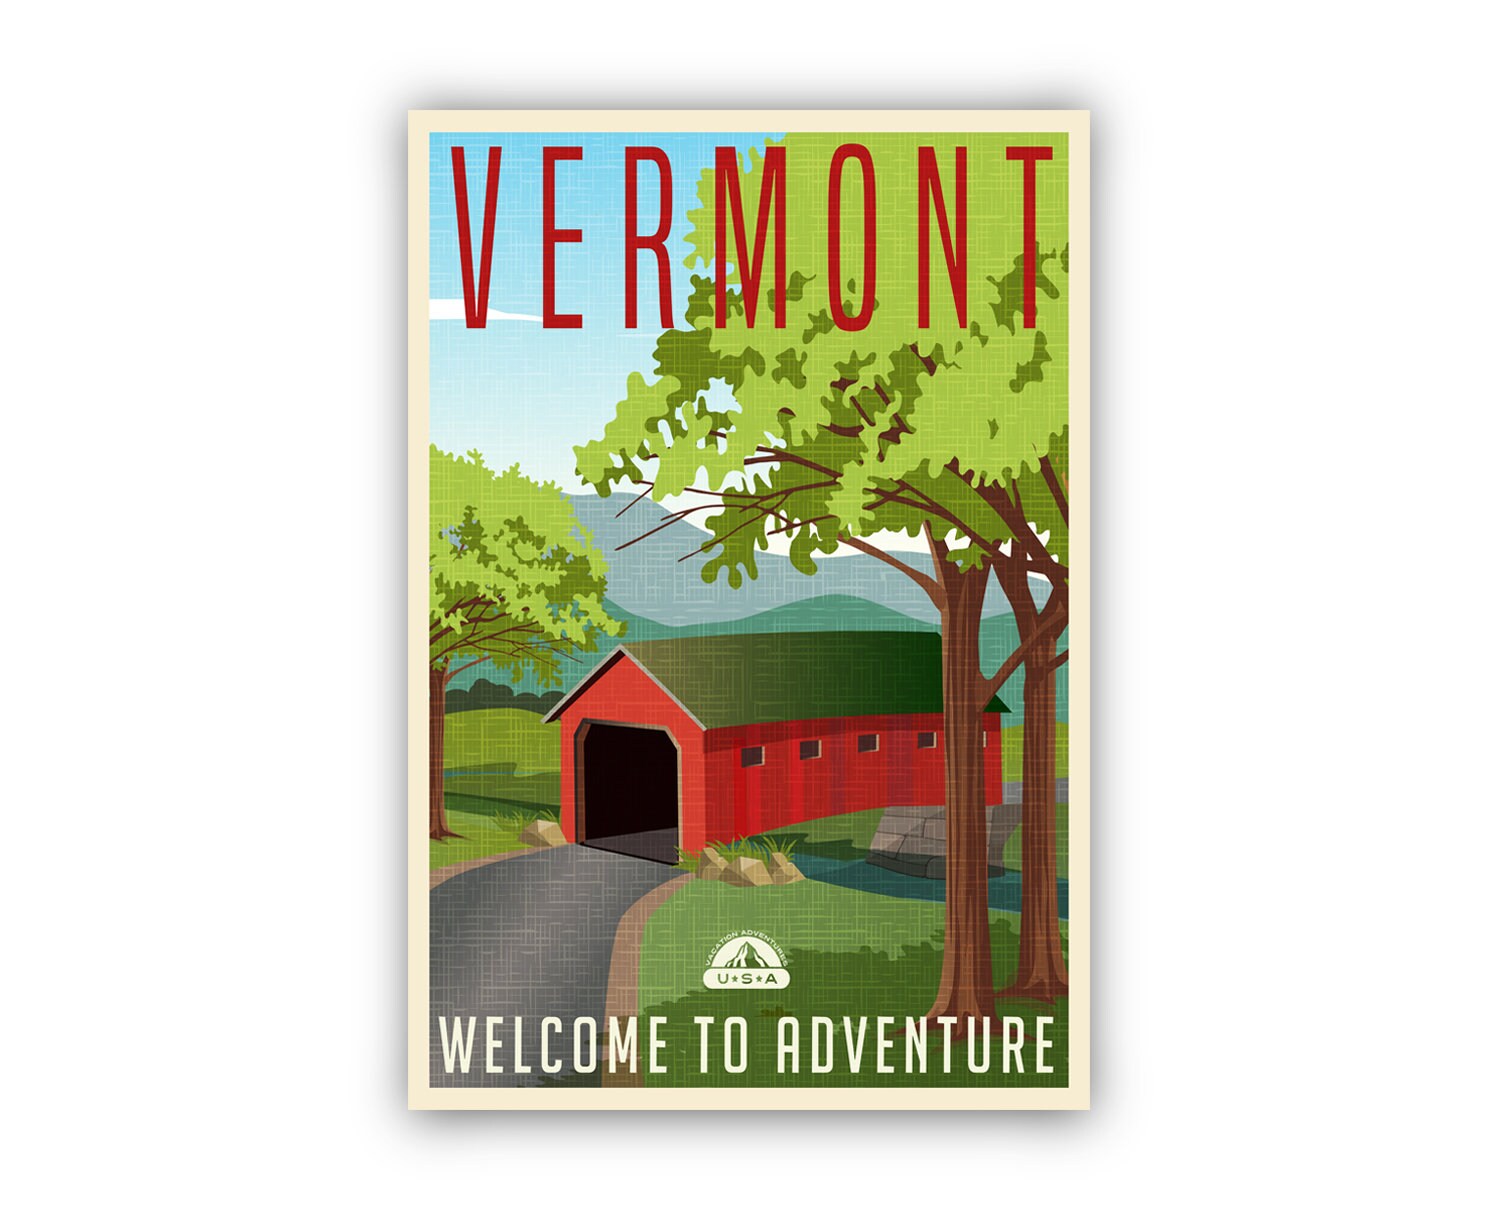 Vermont Vintage Rustic Poster Print, Retro Style Travel Poster